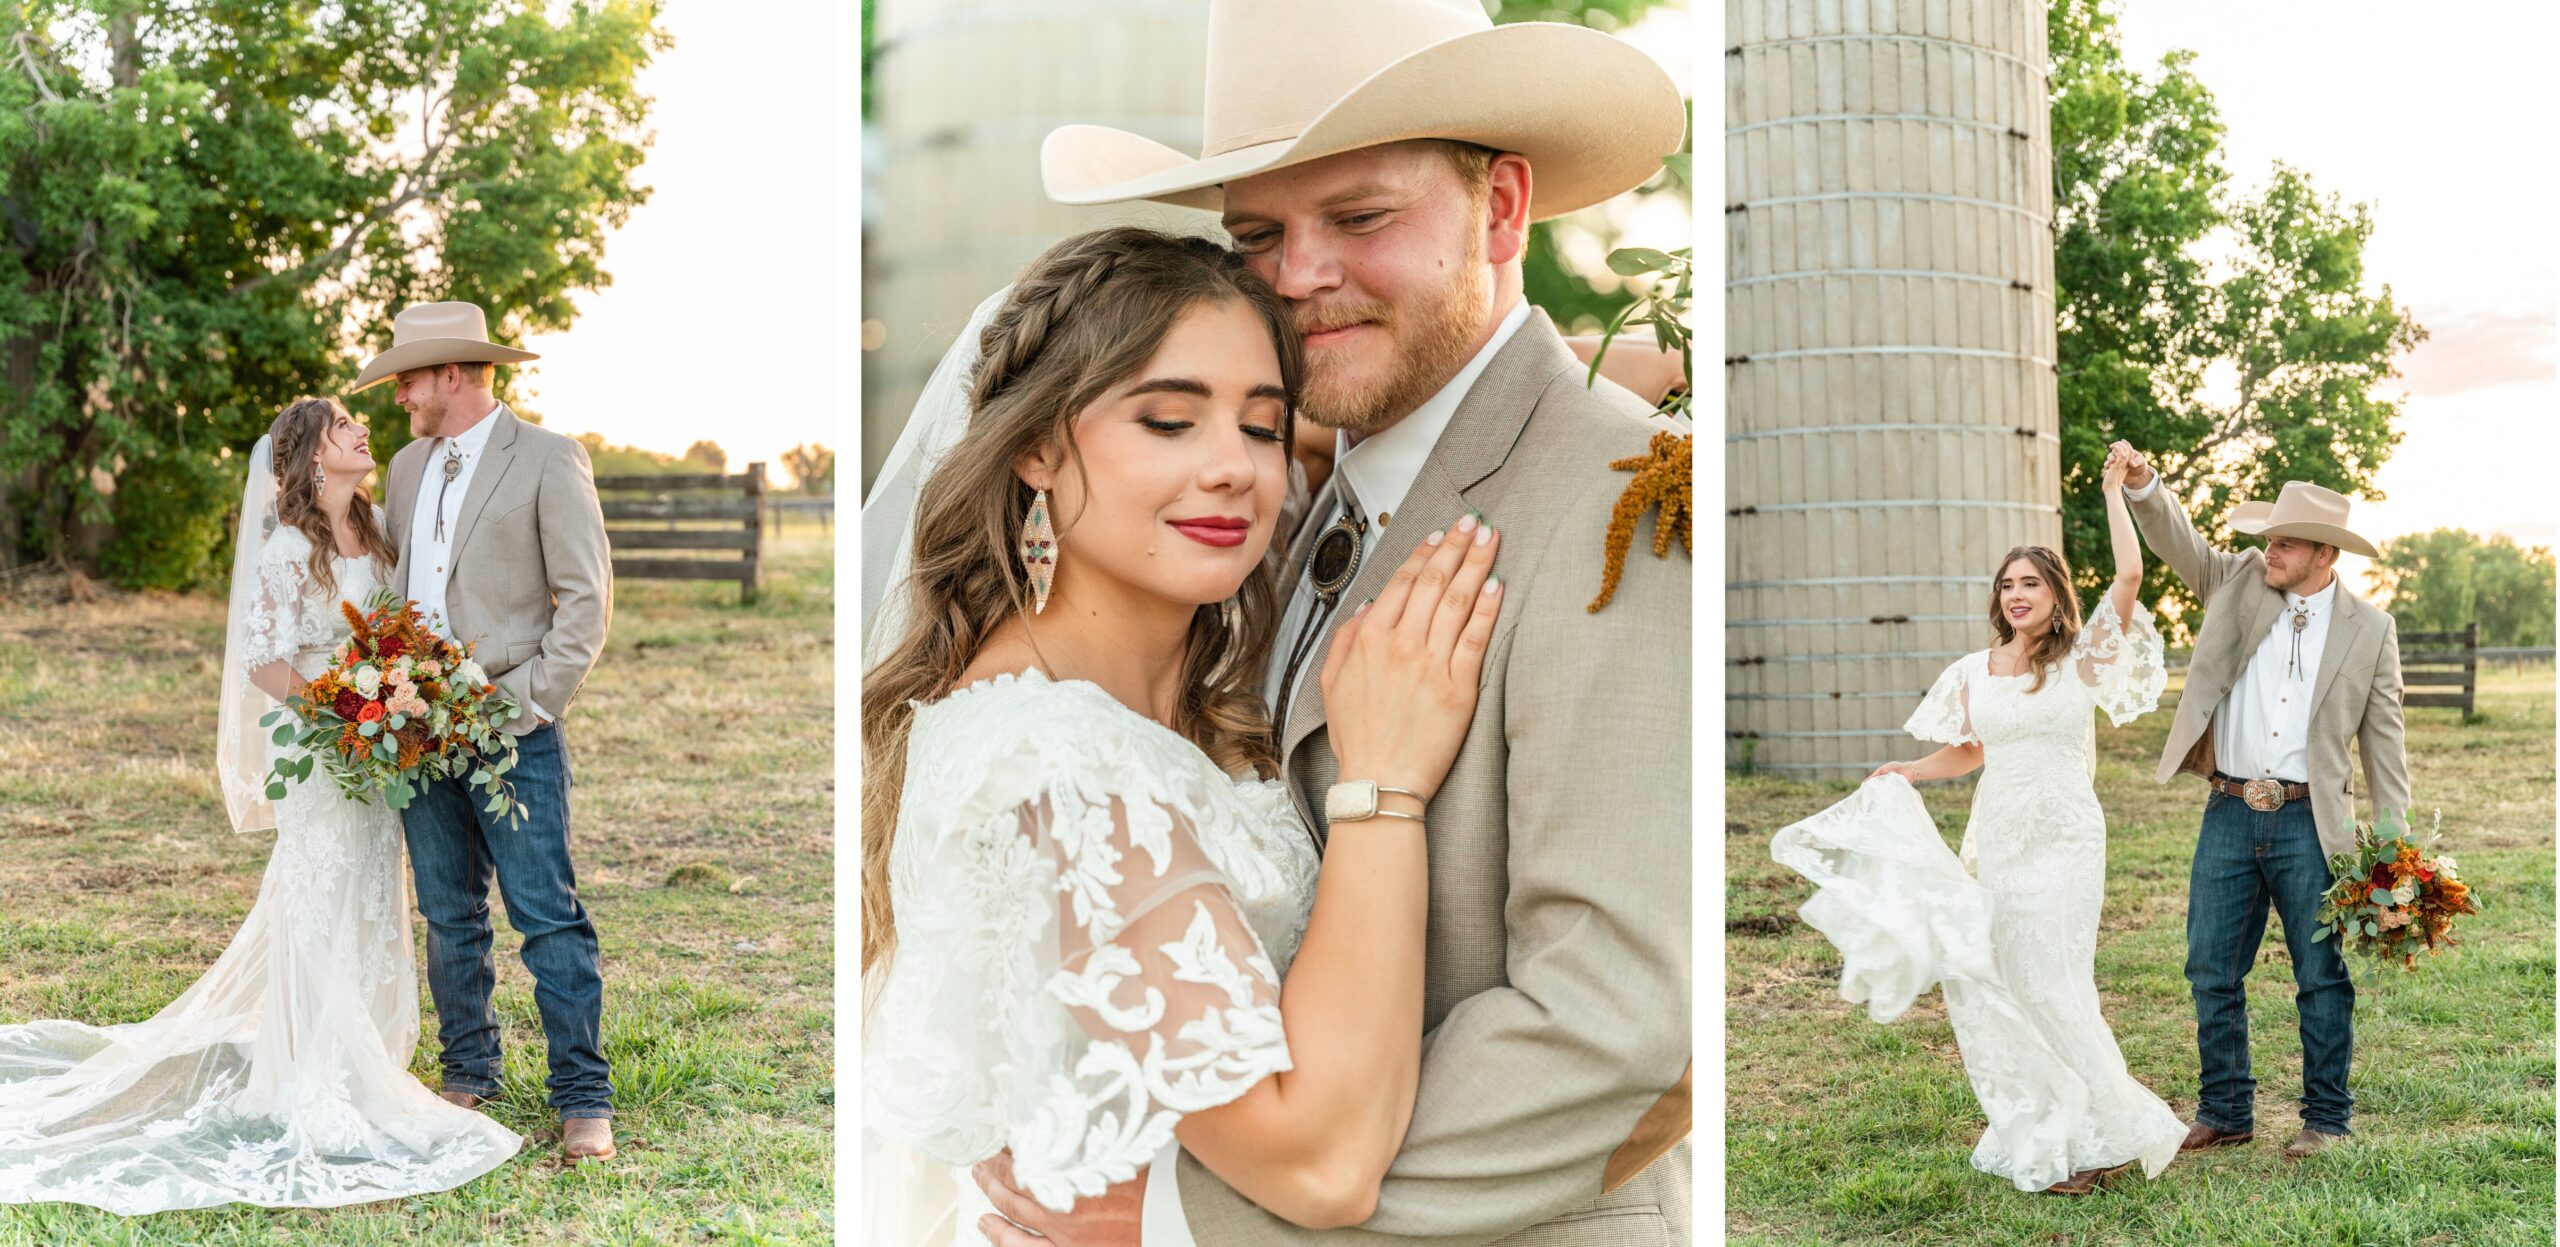 country themed wedding, groom with cowboy hat